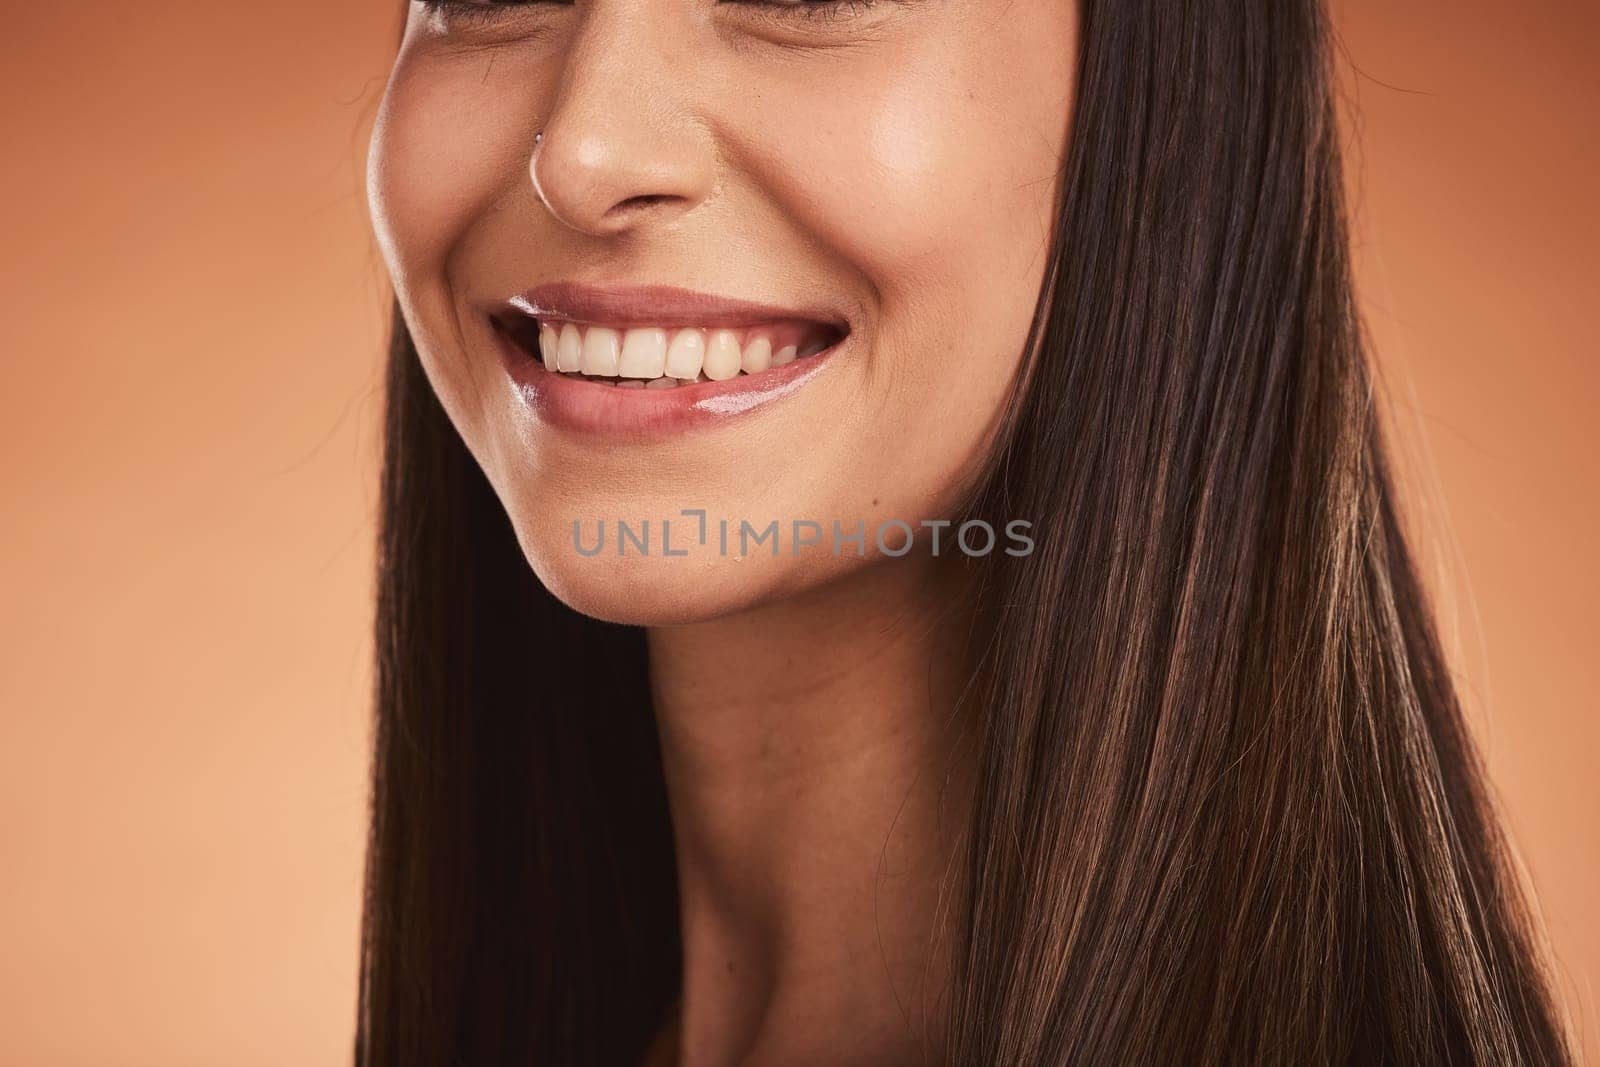 Beauty, smile and teeth, portrait of woman in studio with luxury makeup and dental care for healthy and clean mouth. Health, wellness and beautiful happy model girl with big smile on brown background.